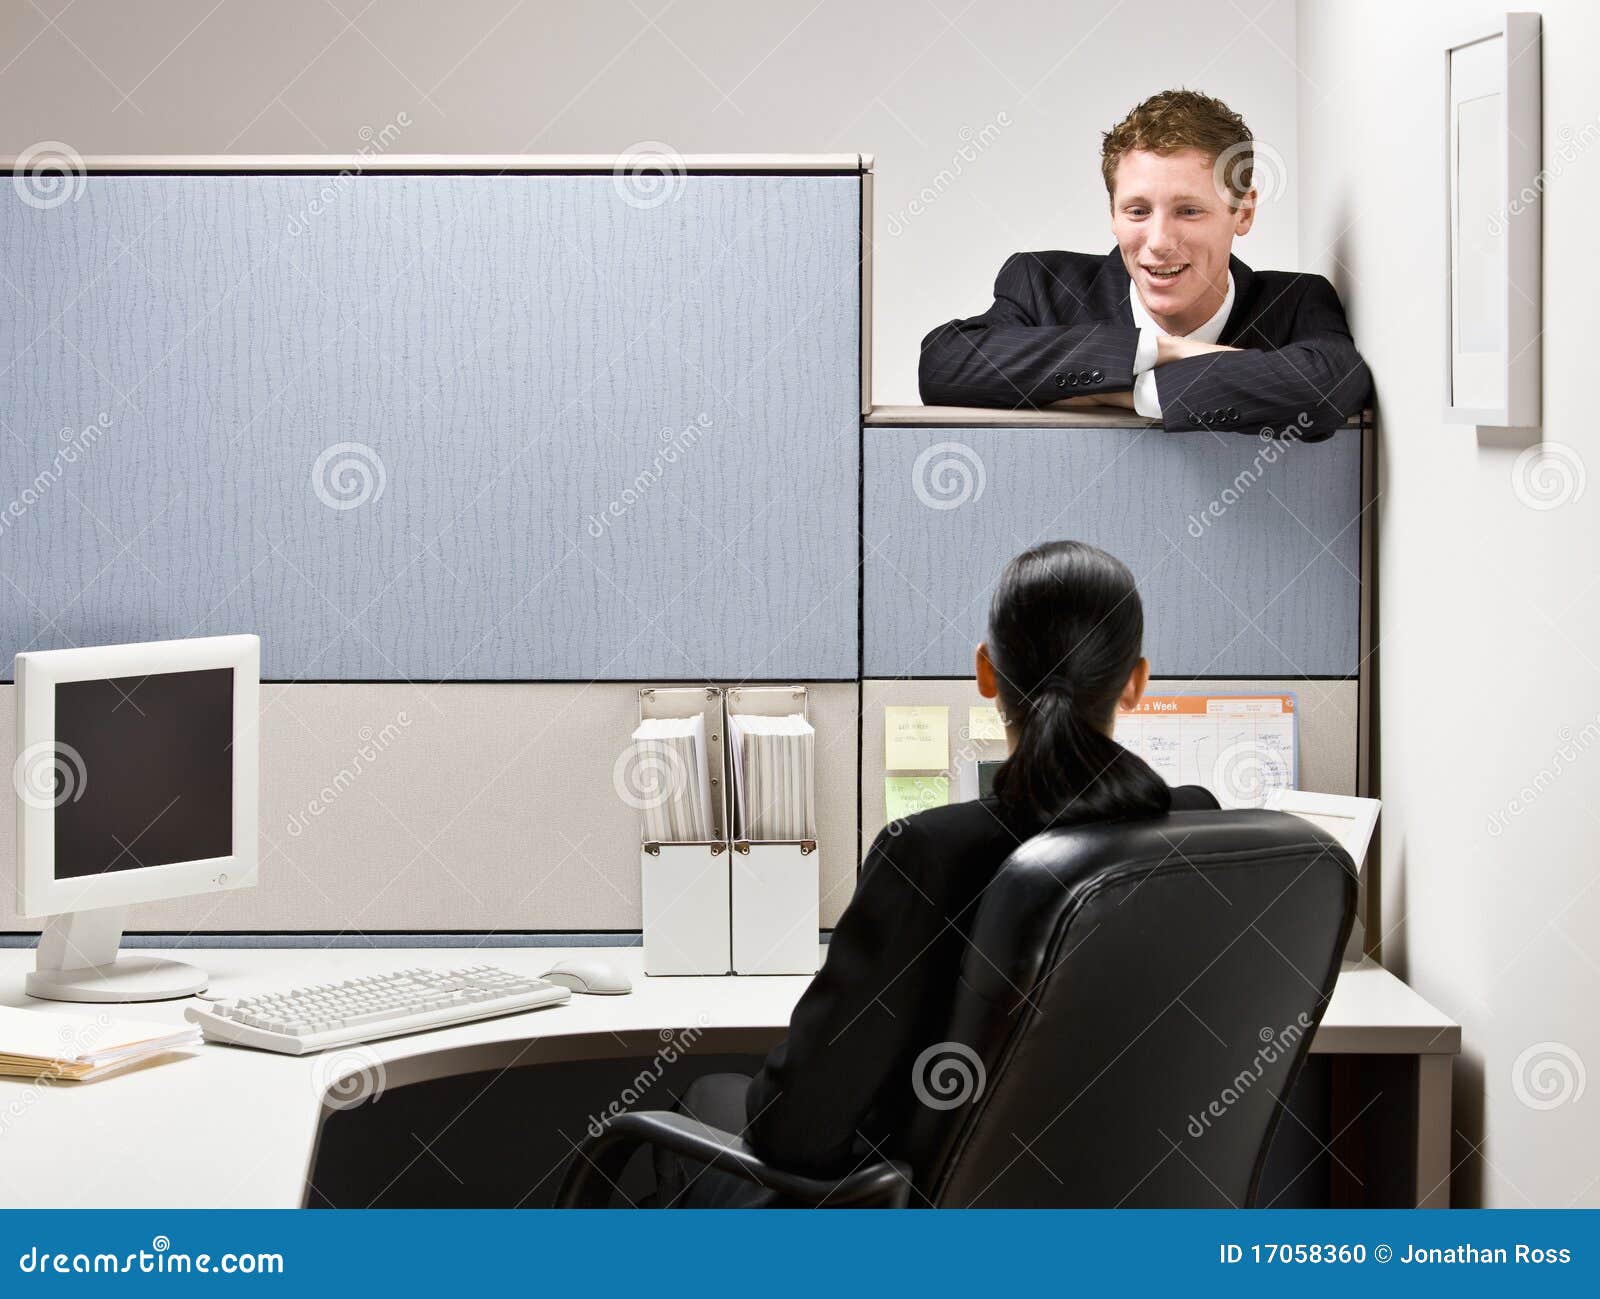 businessman talking to co-worker